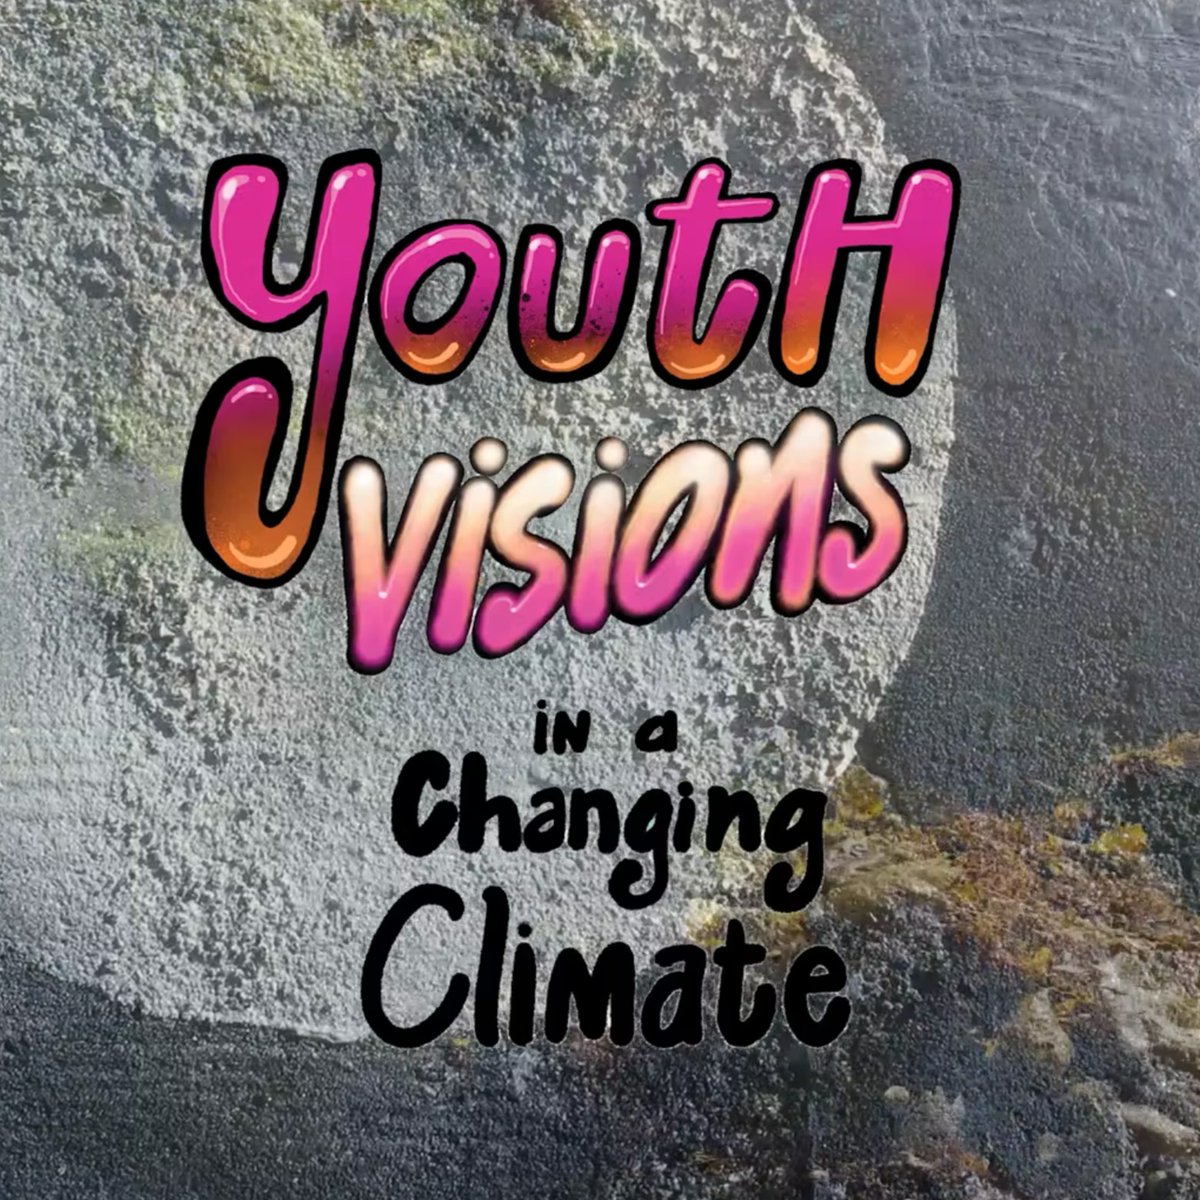 🎨 🖌️ Learn how Youth Visions in a Changing Climate, one of the Knowledge into Use awards winners, uses arts-based and participatory methods to foster dialogue and build climate resilience in their communities. Learn more: bit.ly/3JP0lSw